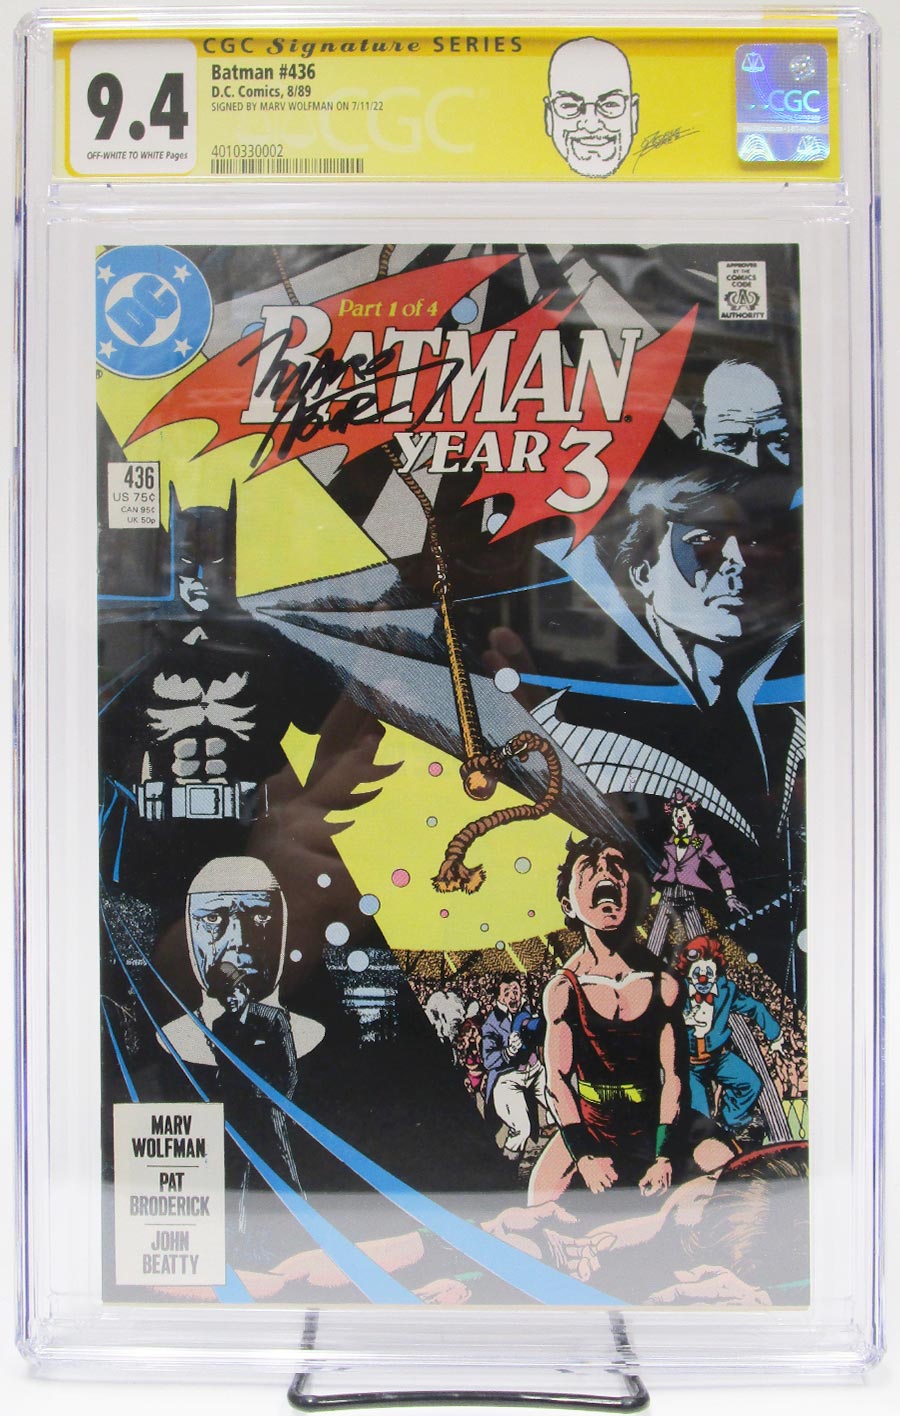 Batman #436 Cover C 1st Ptg Regular Cover CGC Signature Series 9.4 Signed by Marv Wolfman